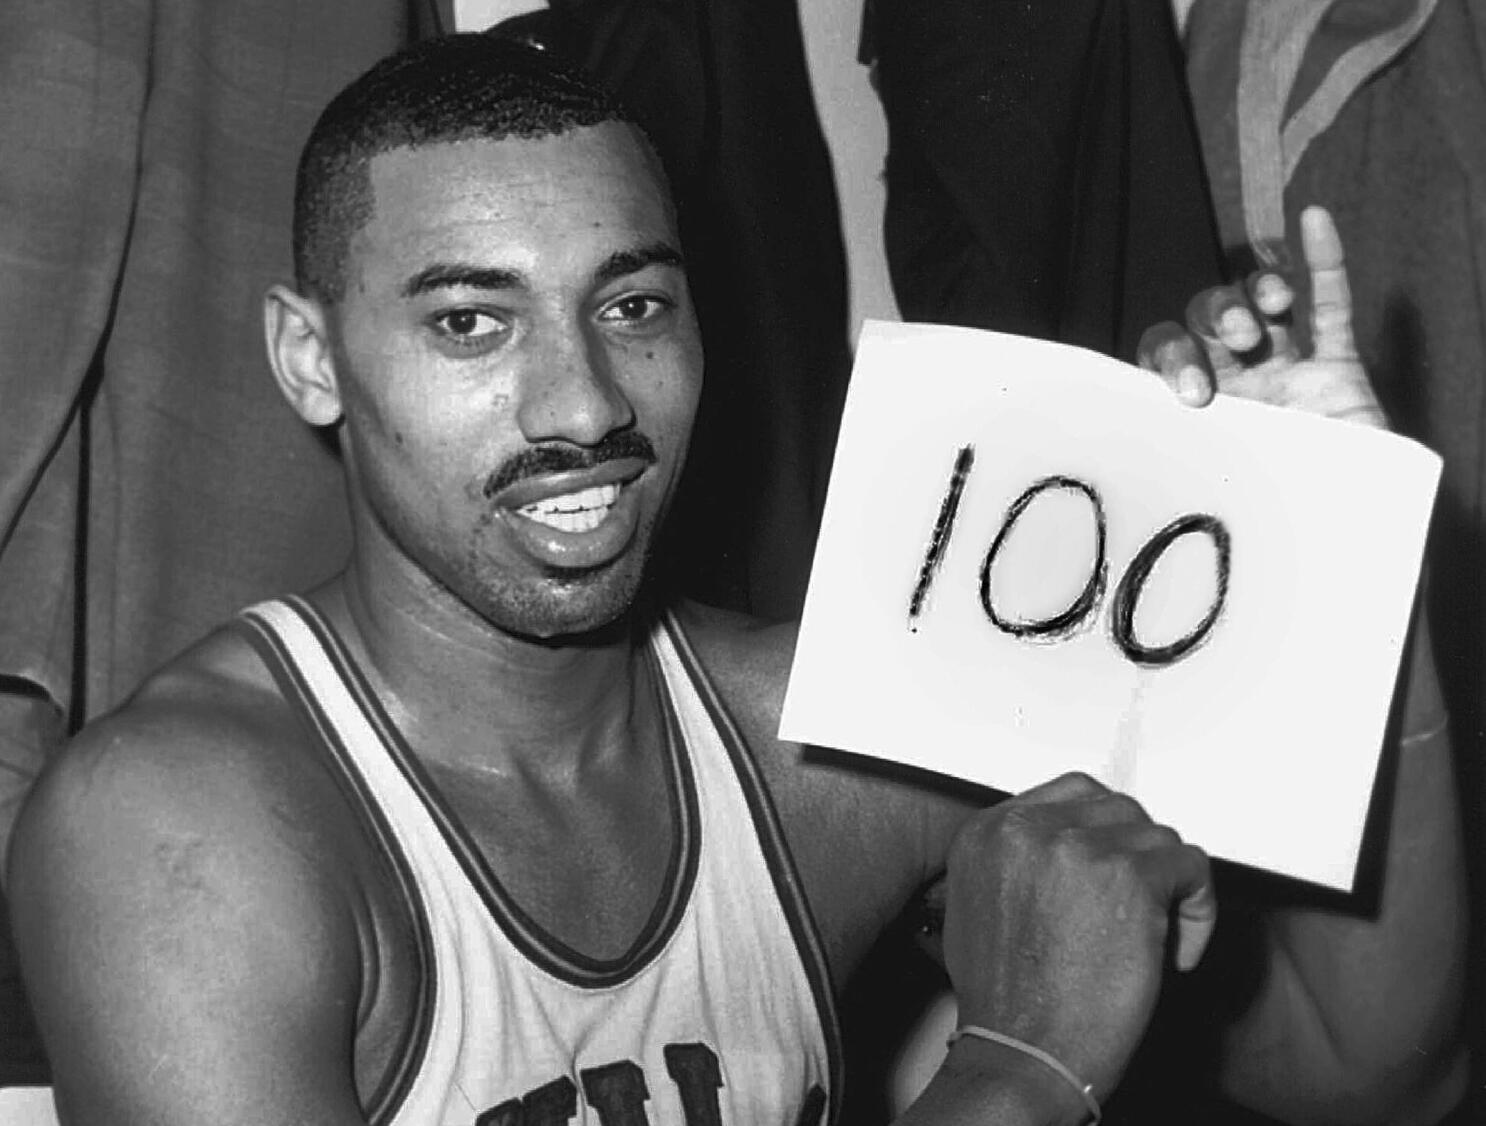 PHOTOS: in 1962, the Media Barely Noticed That Wilt Chamberlain